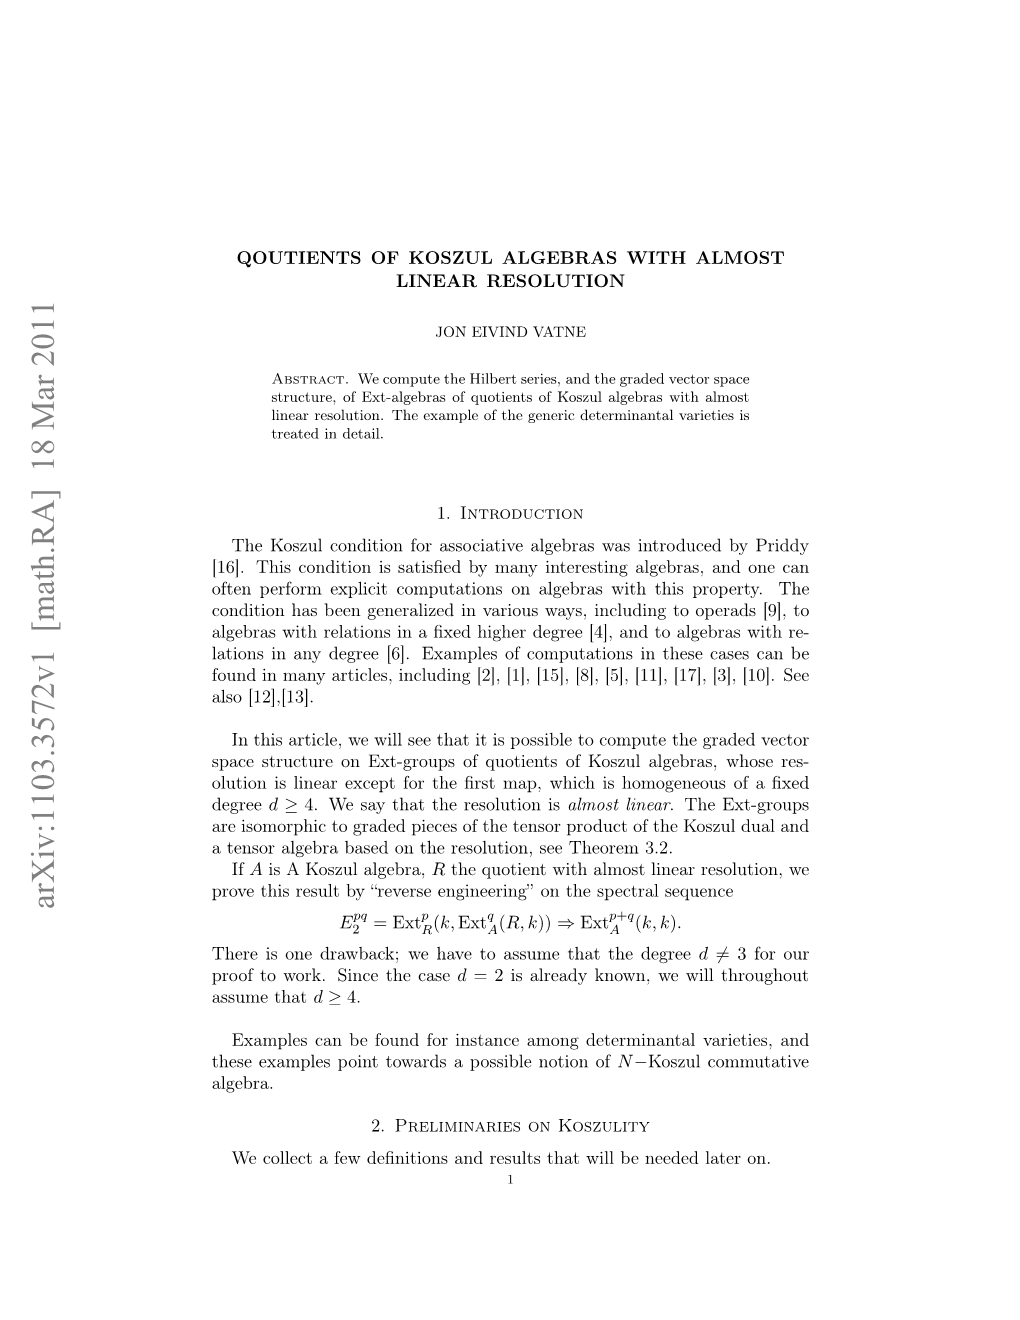 Quotients of Koszul Algebras with Almost Linear Resolution 3